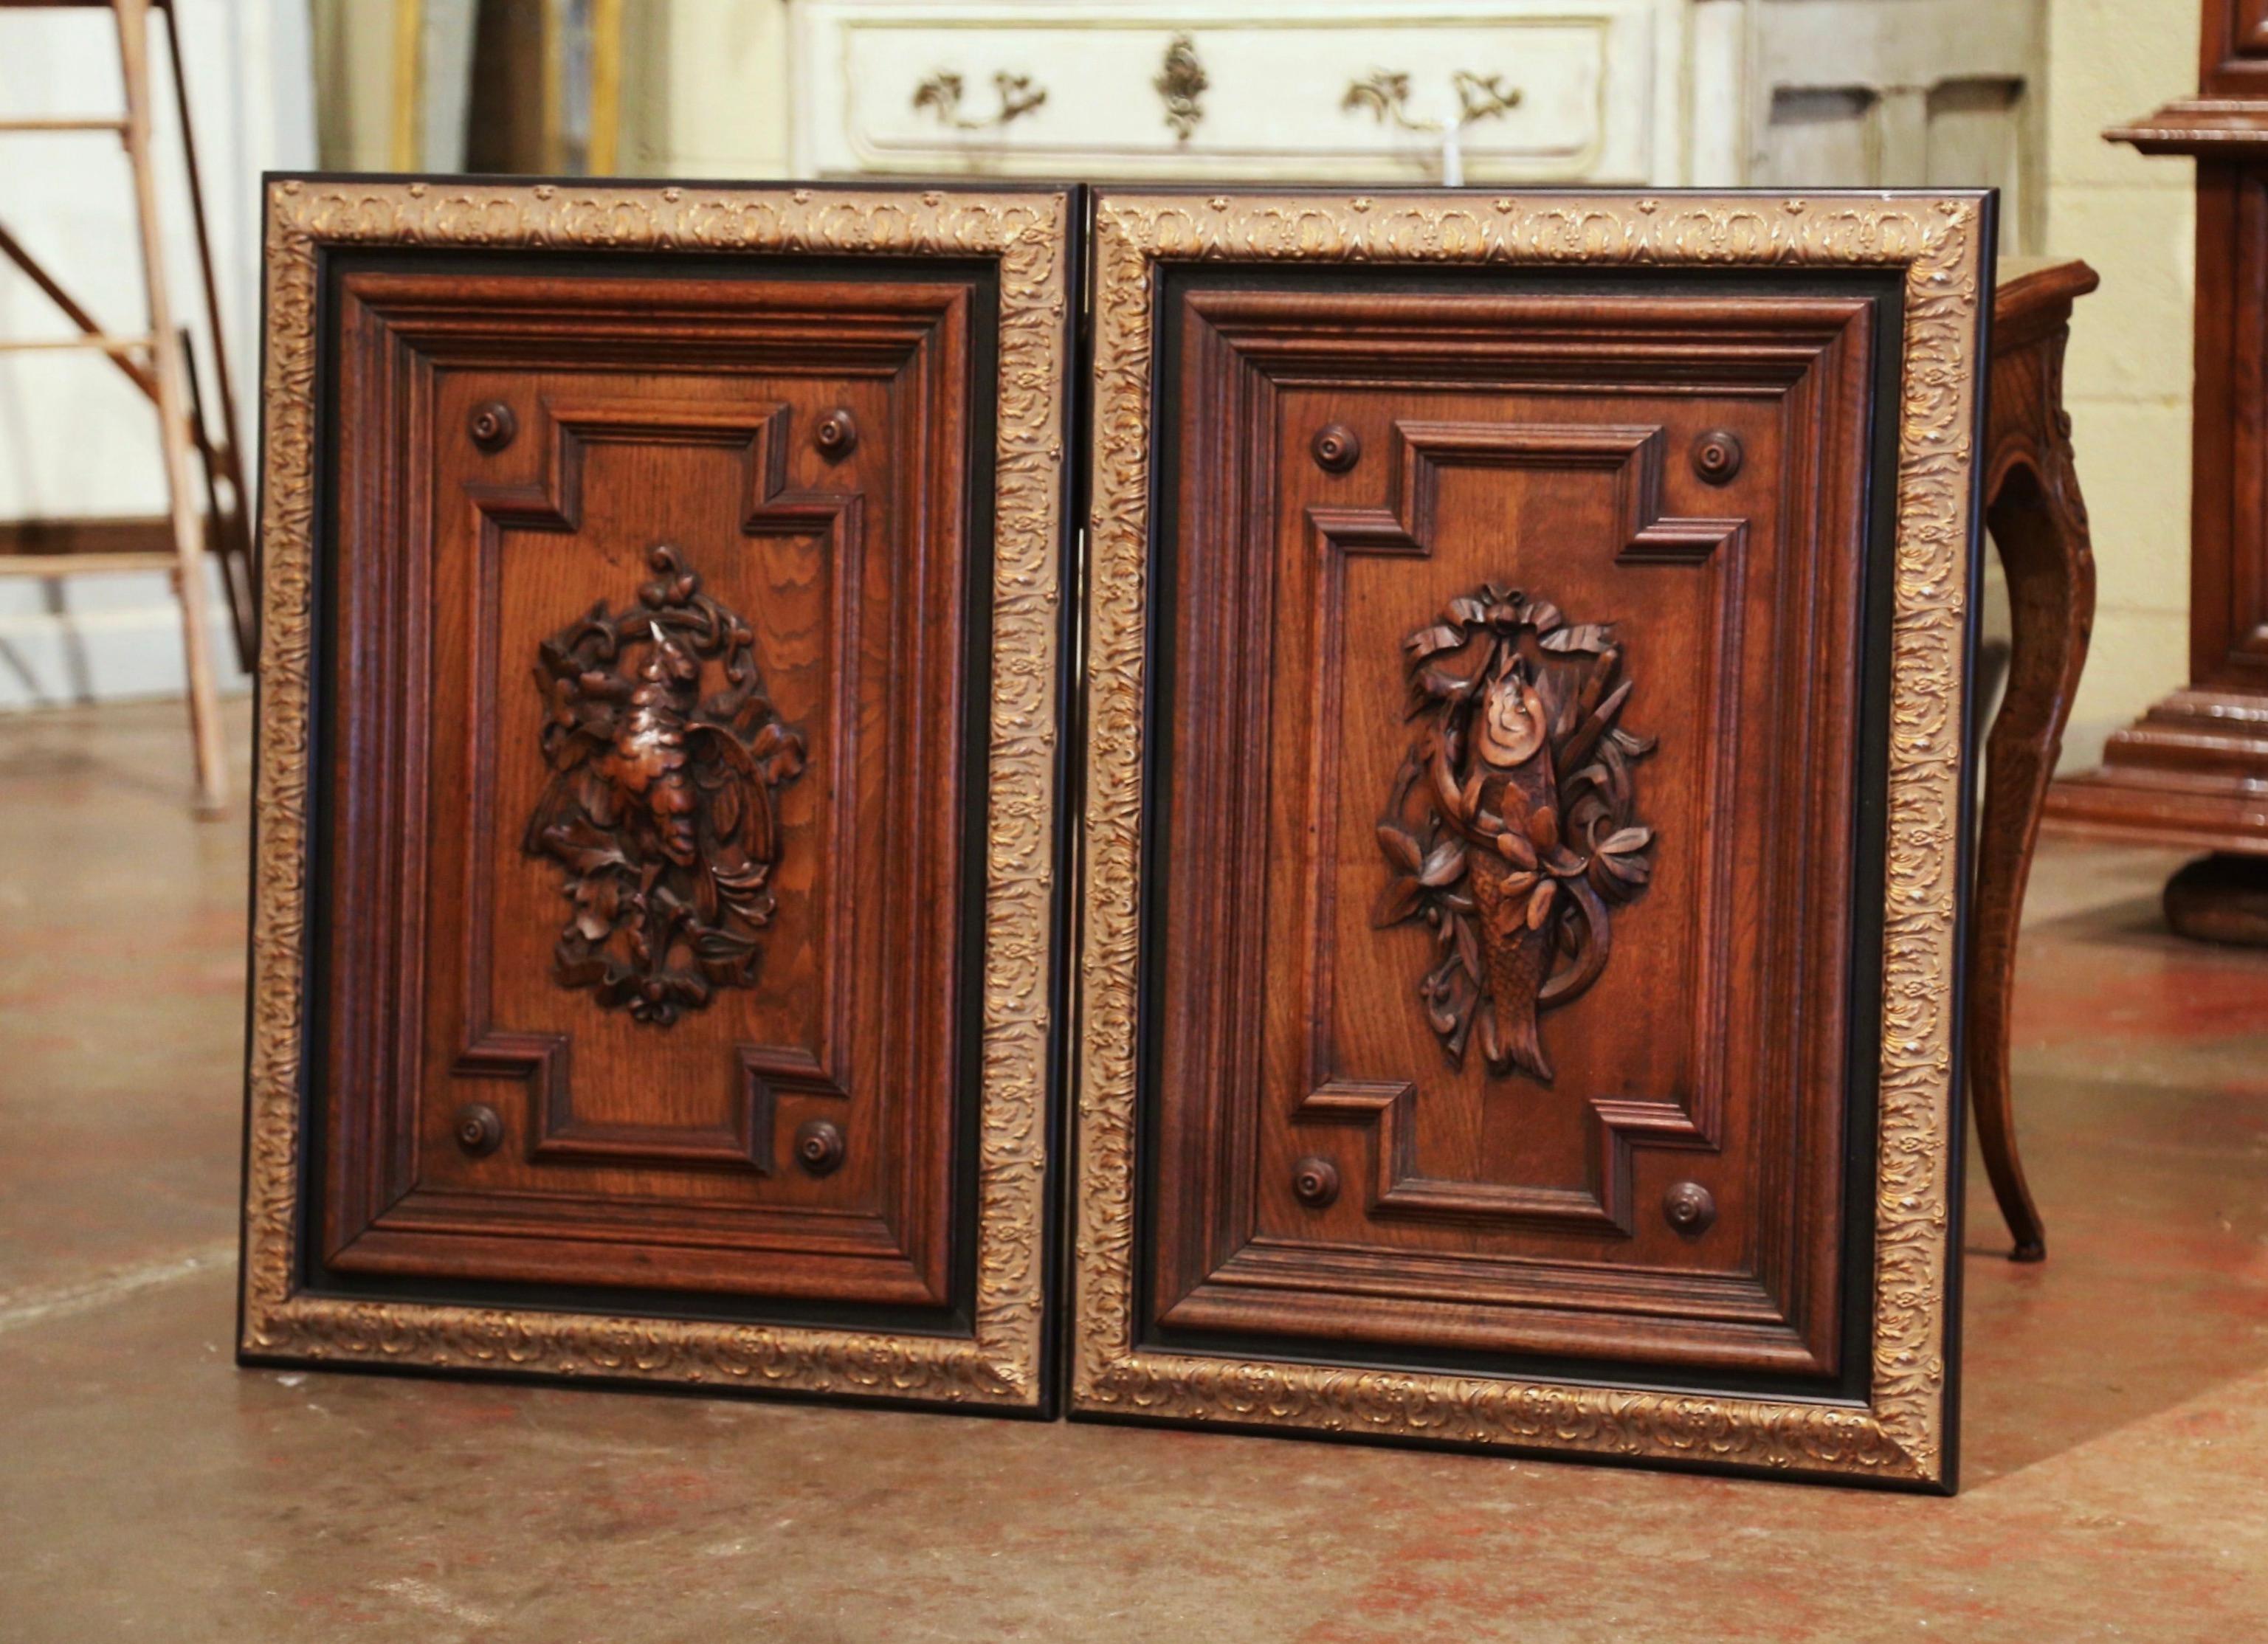 Decorate a man's office with this pair of elegant antique panels. Crafted in France circa 1870, and made of oak, the sculpted elements are decorated with exquisite carvings in high relief; one-door features a central medallion with a bird, foliage